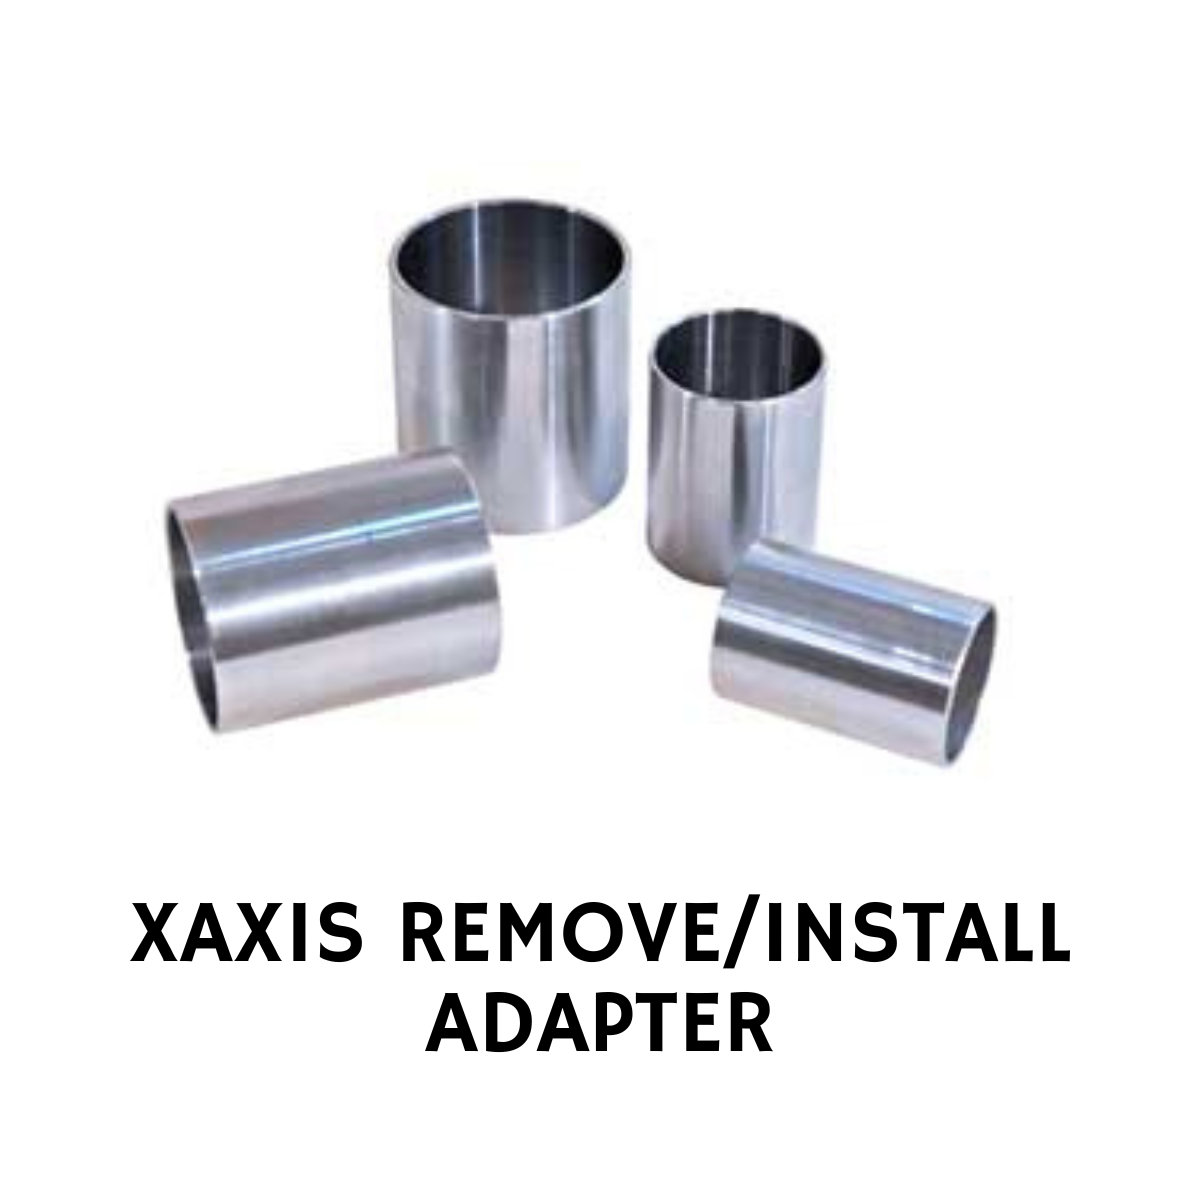 XAXIS REMOVE/INSTALL ADAPTER